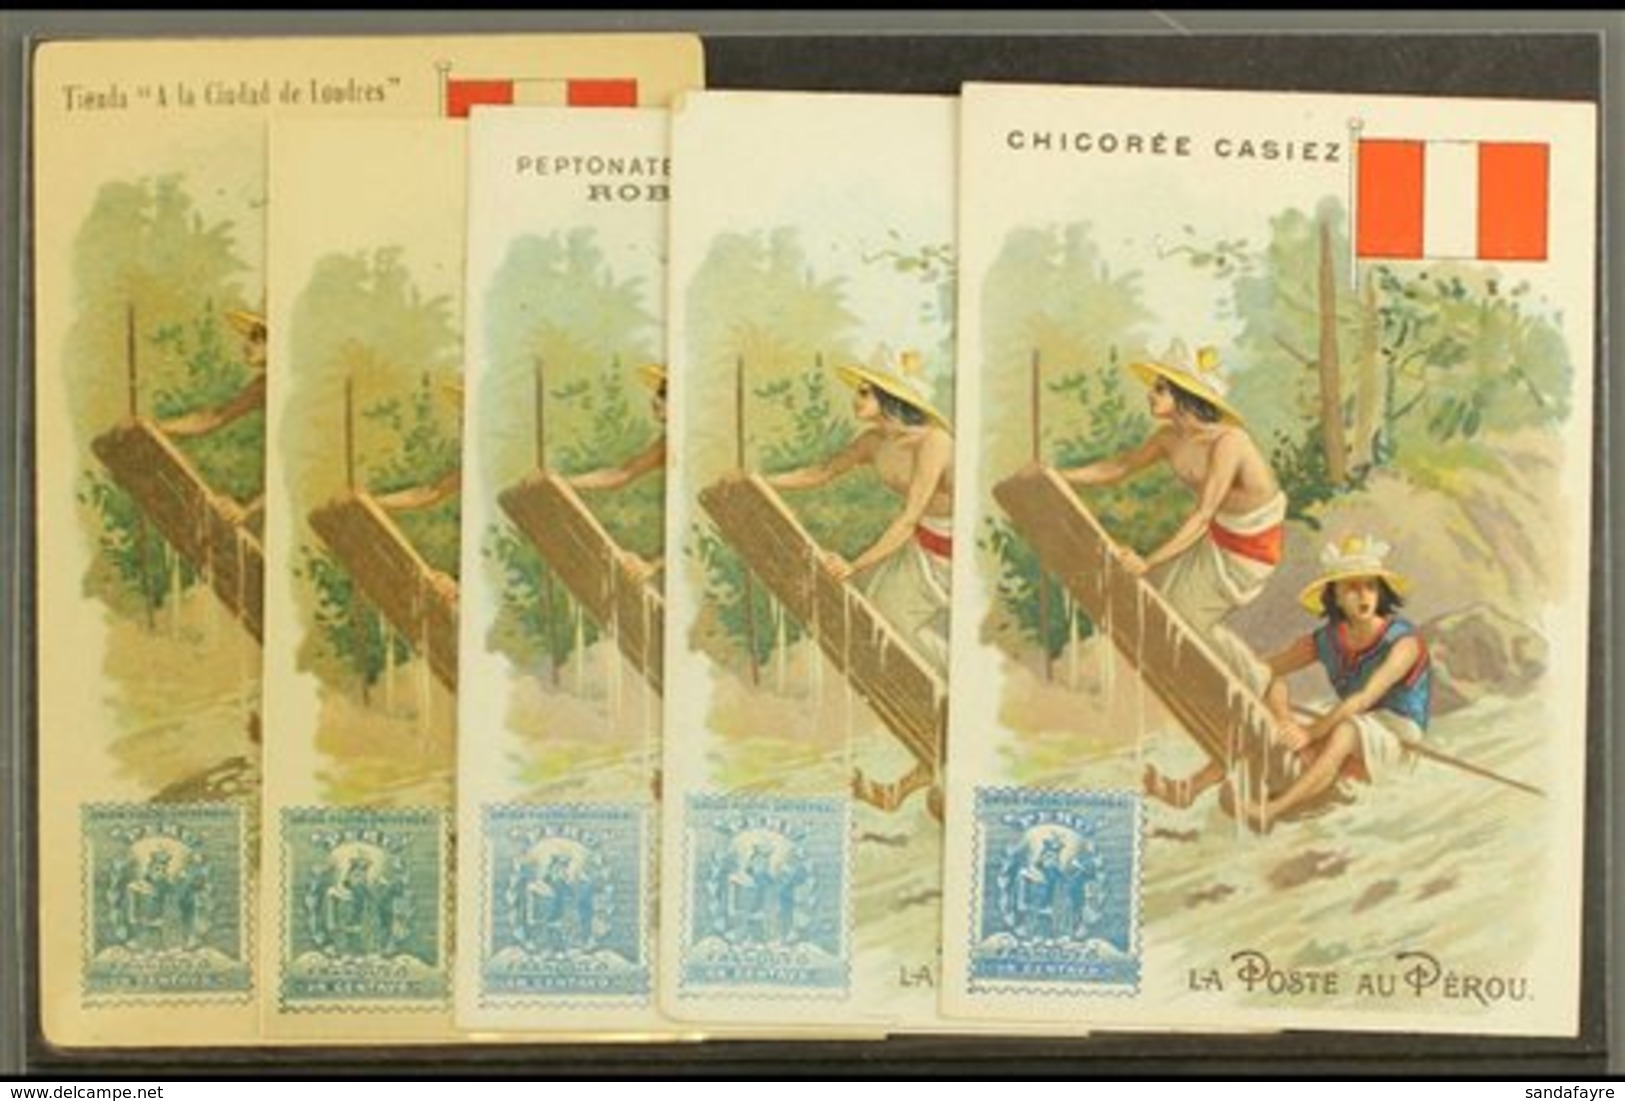 1908 Stamp Designs On Advertising Cards, ALL Different, Seldom Seen (5 Cards) For More Images, Please Visit Http://www.s - Pérou